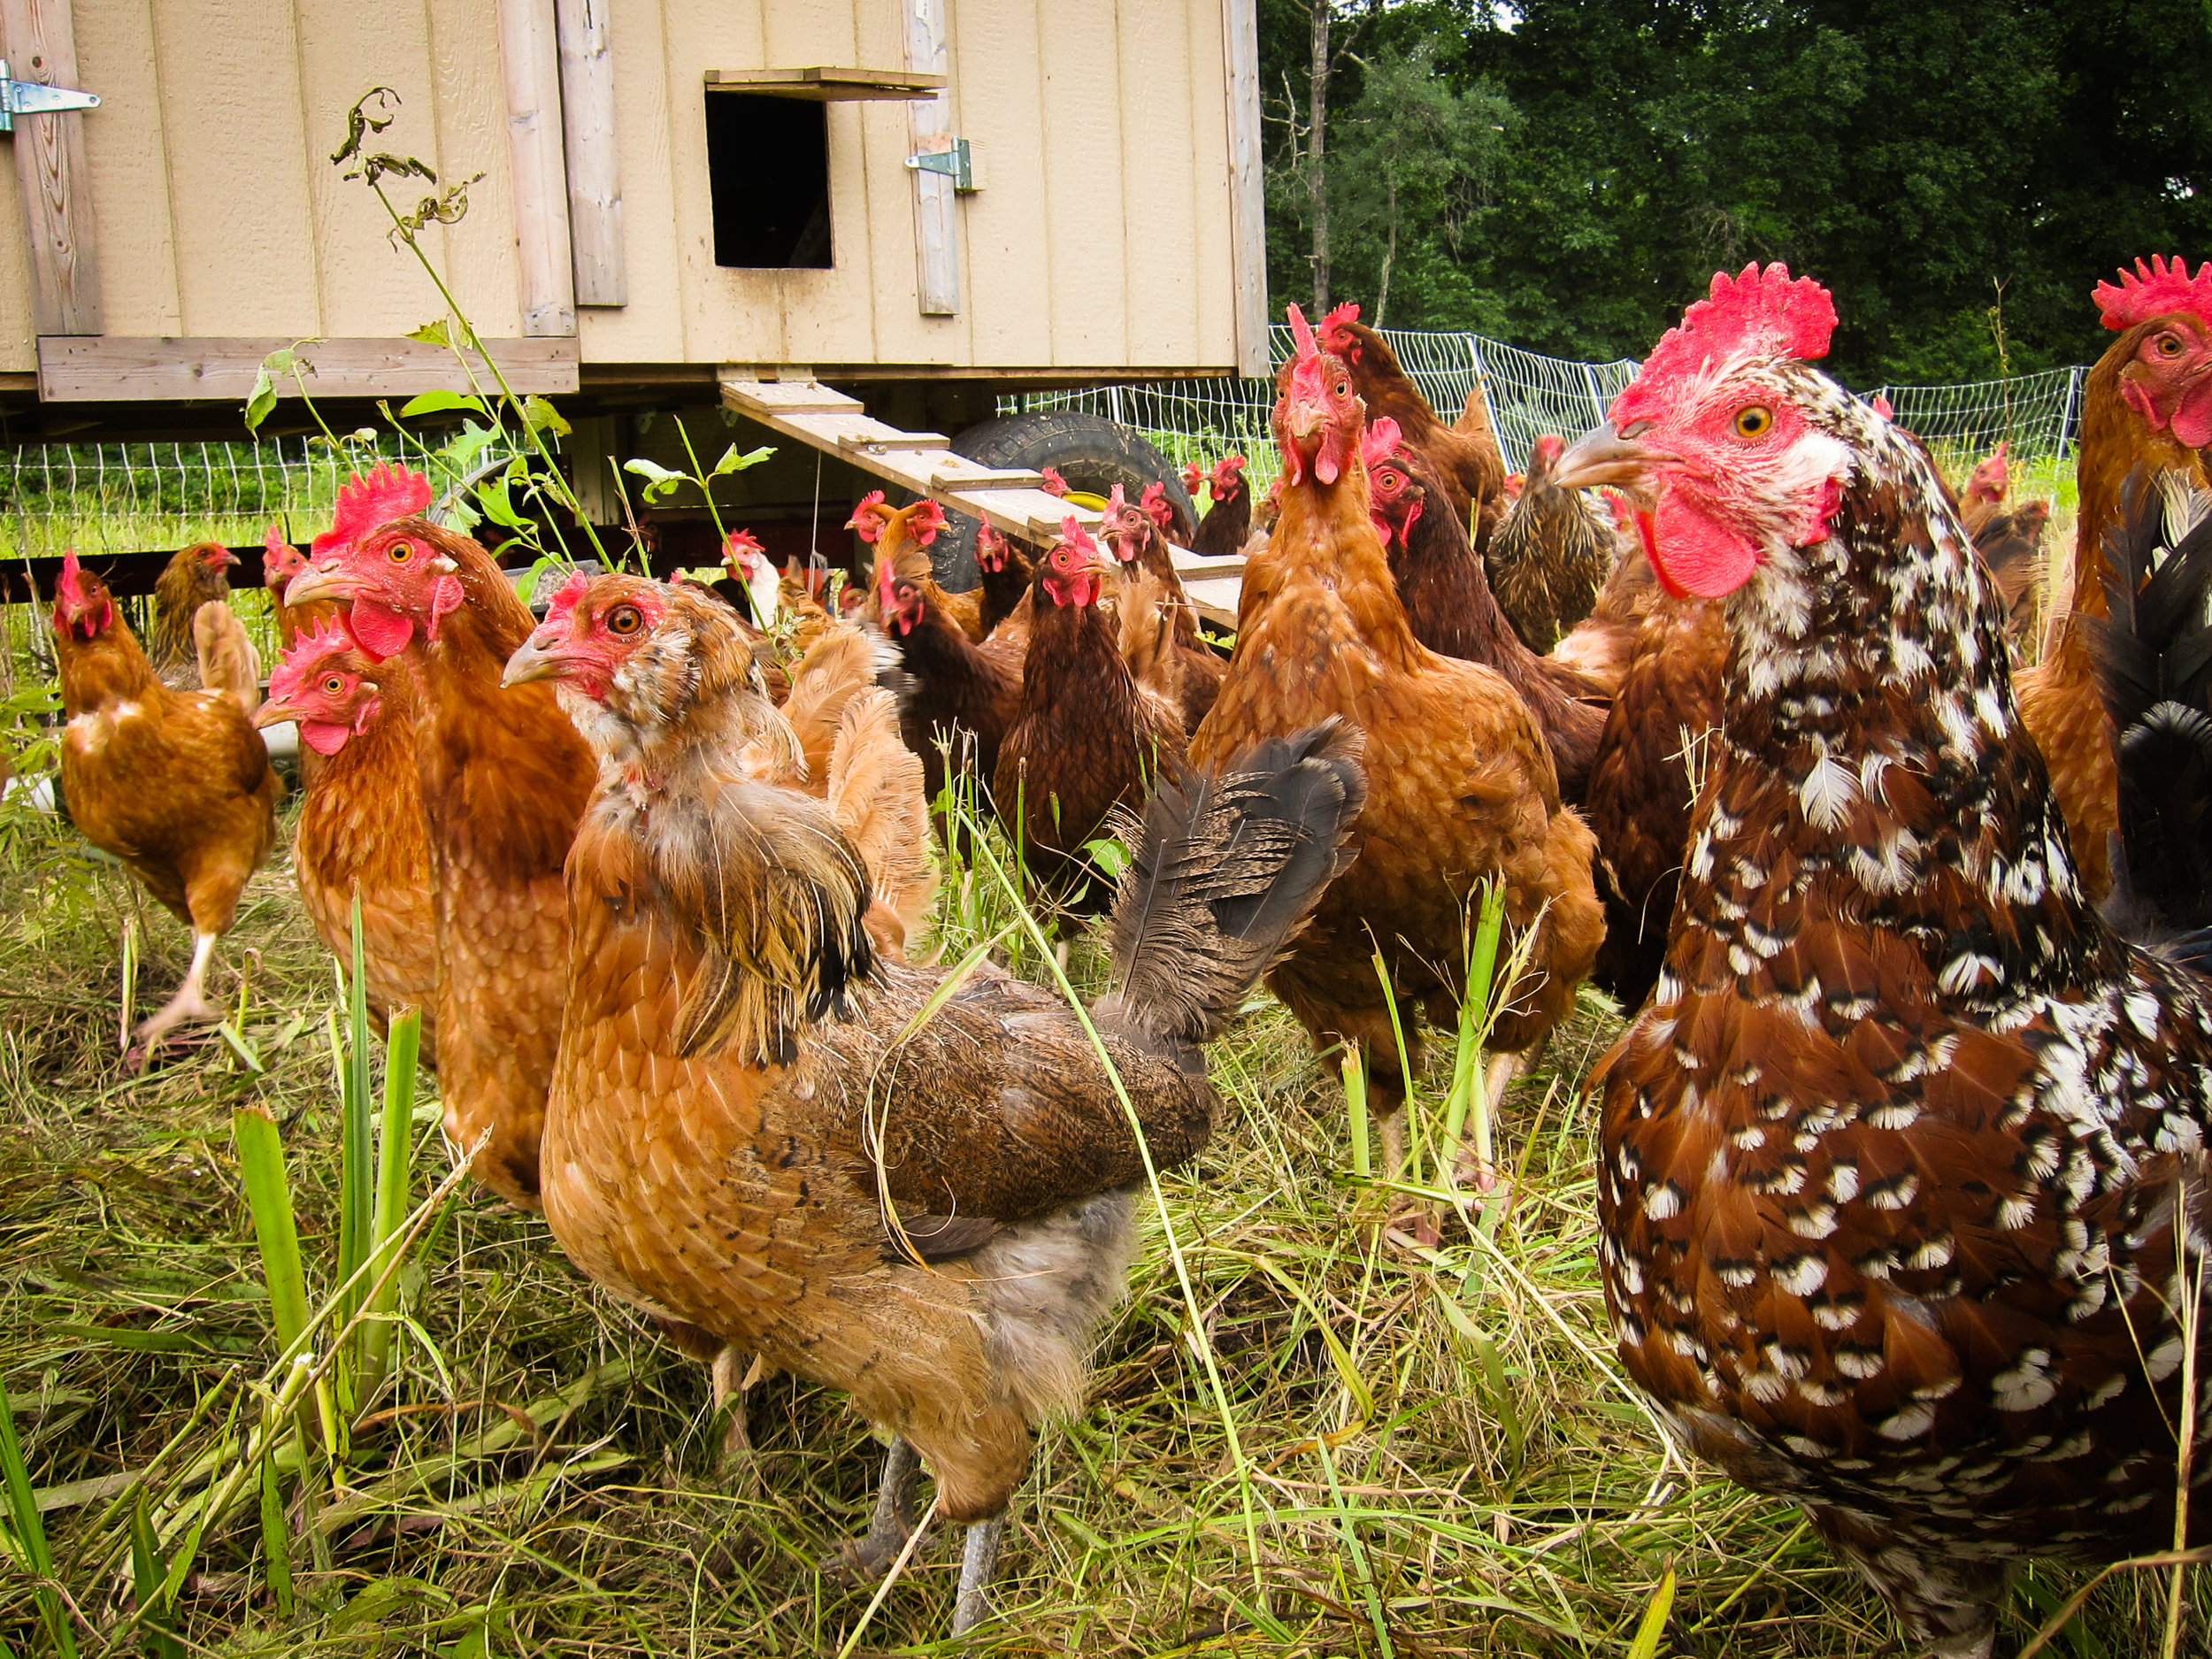  We managed a flock of about 400 egg laying hens in three different mobile coops that were moved every other day. 